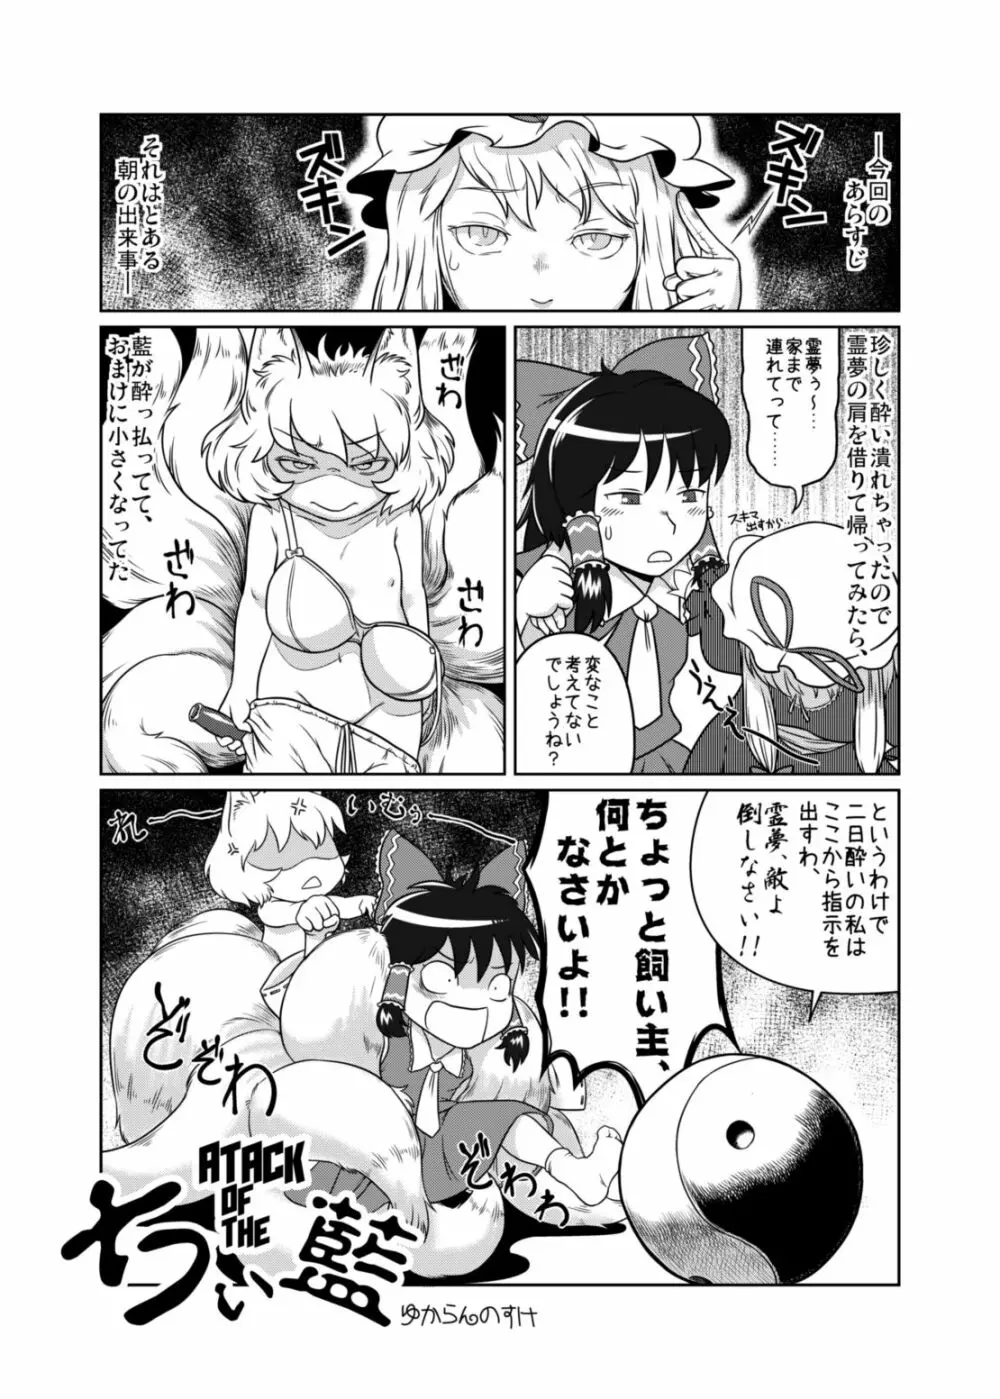 ATACK OF THE ちぃ藍 Page.1